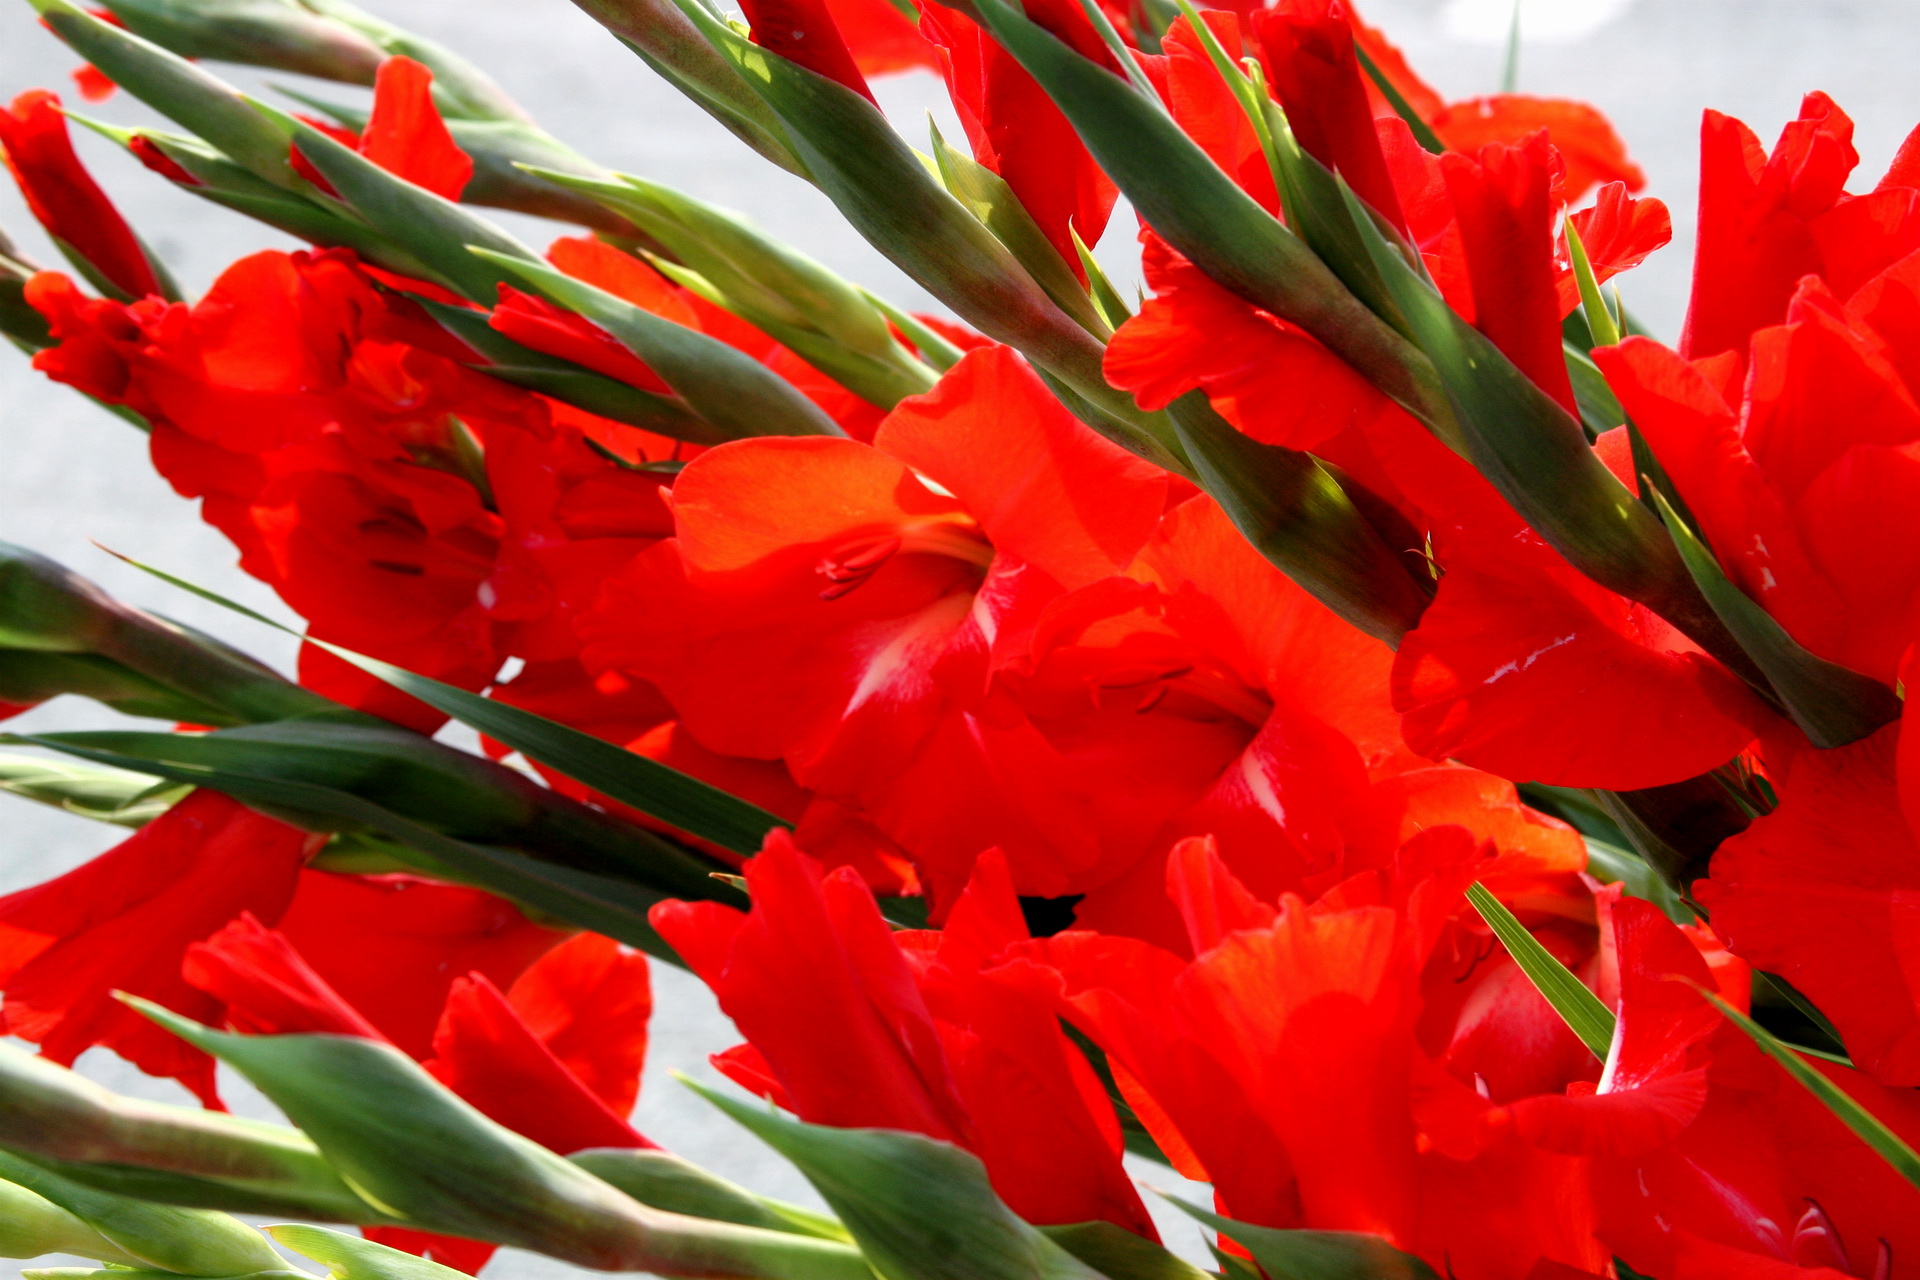 Gladiolus are flowering plants in the iris family.